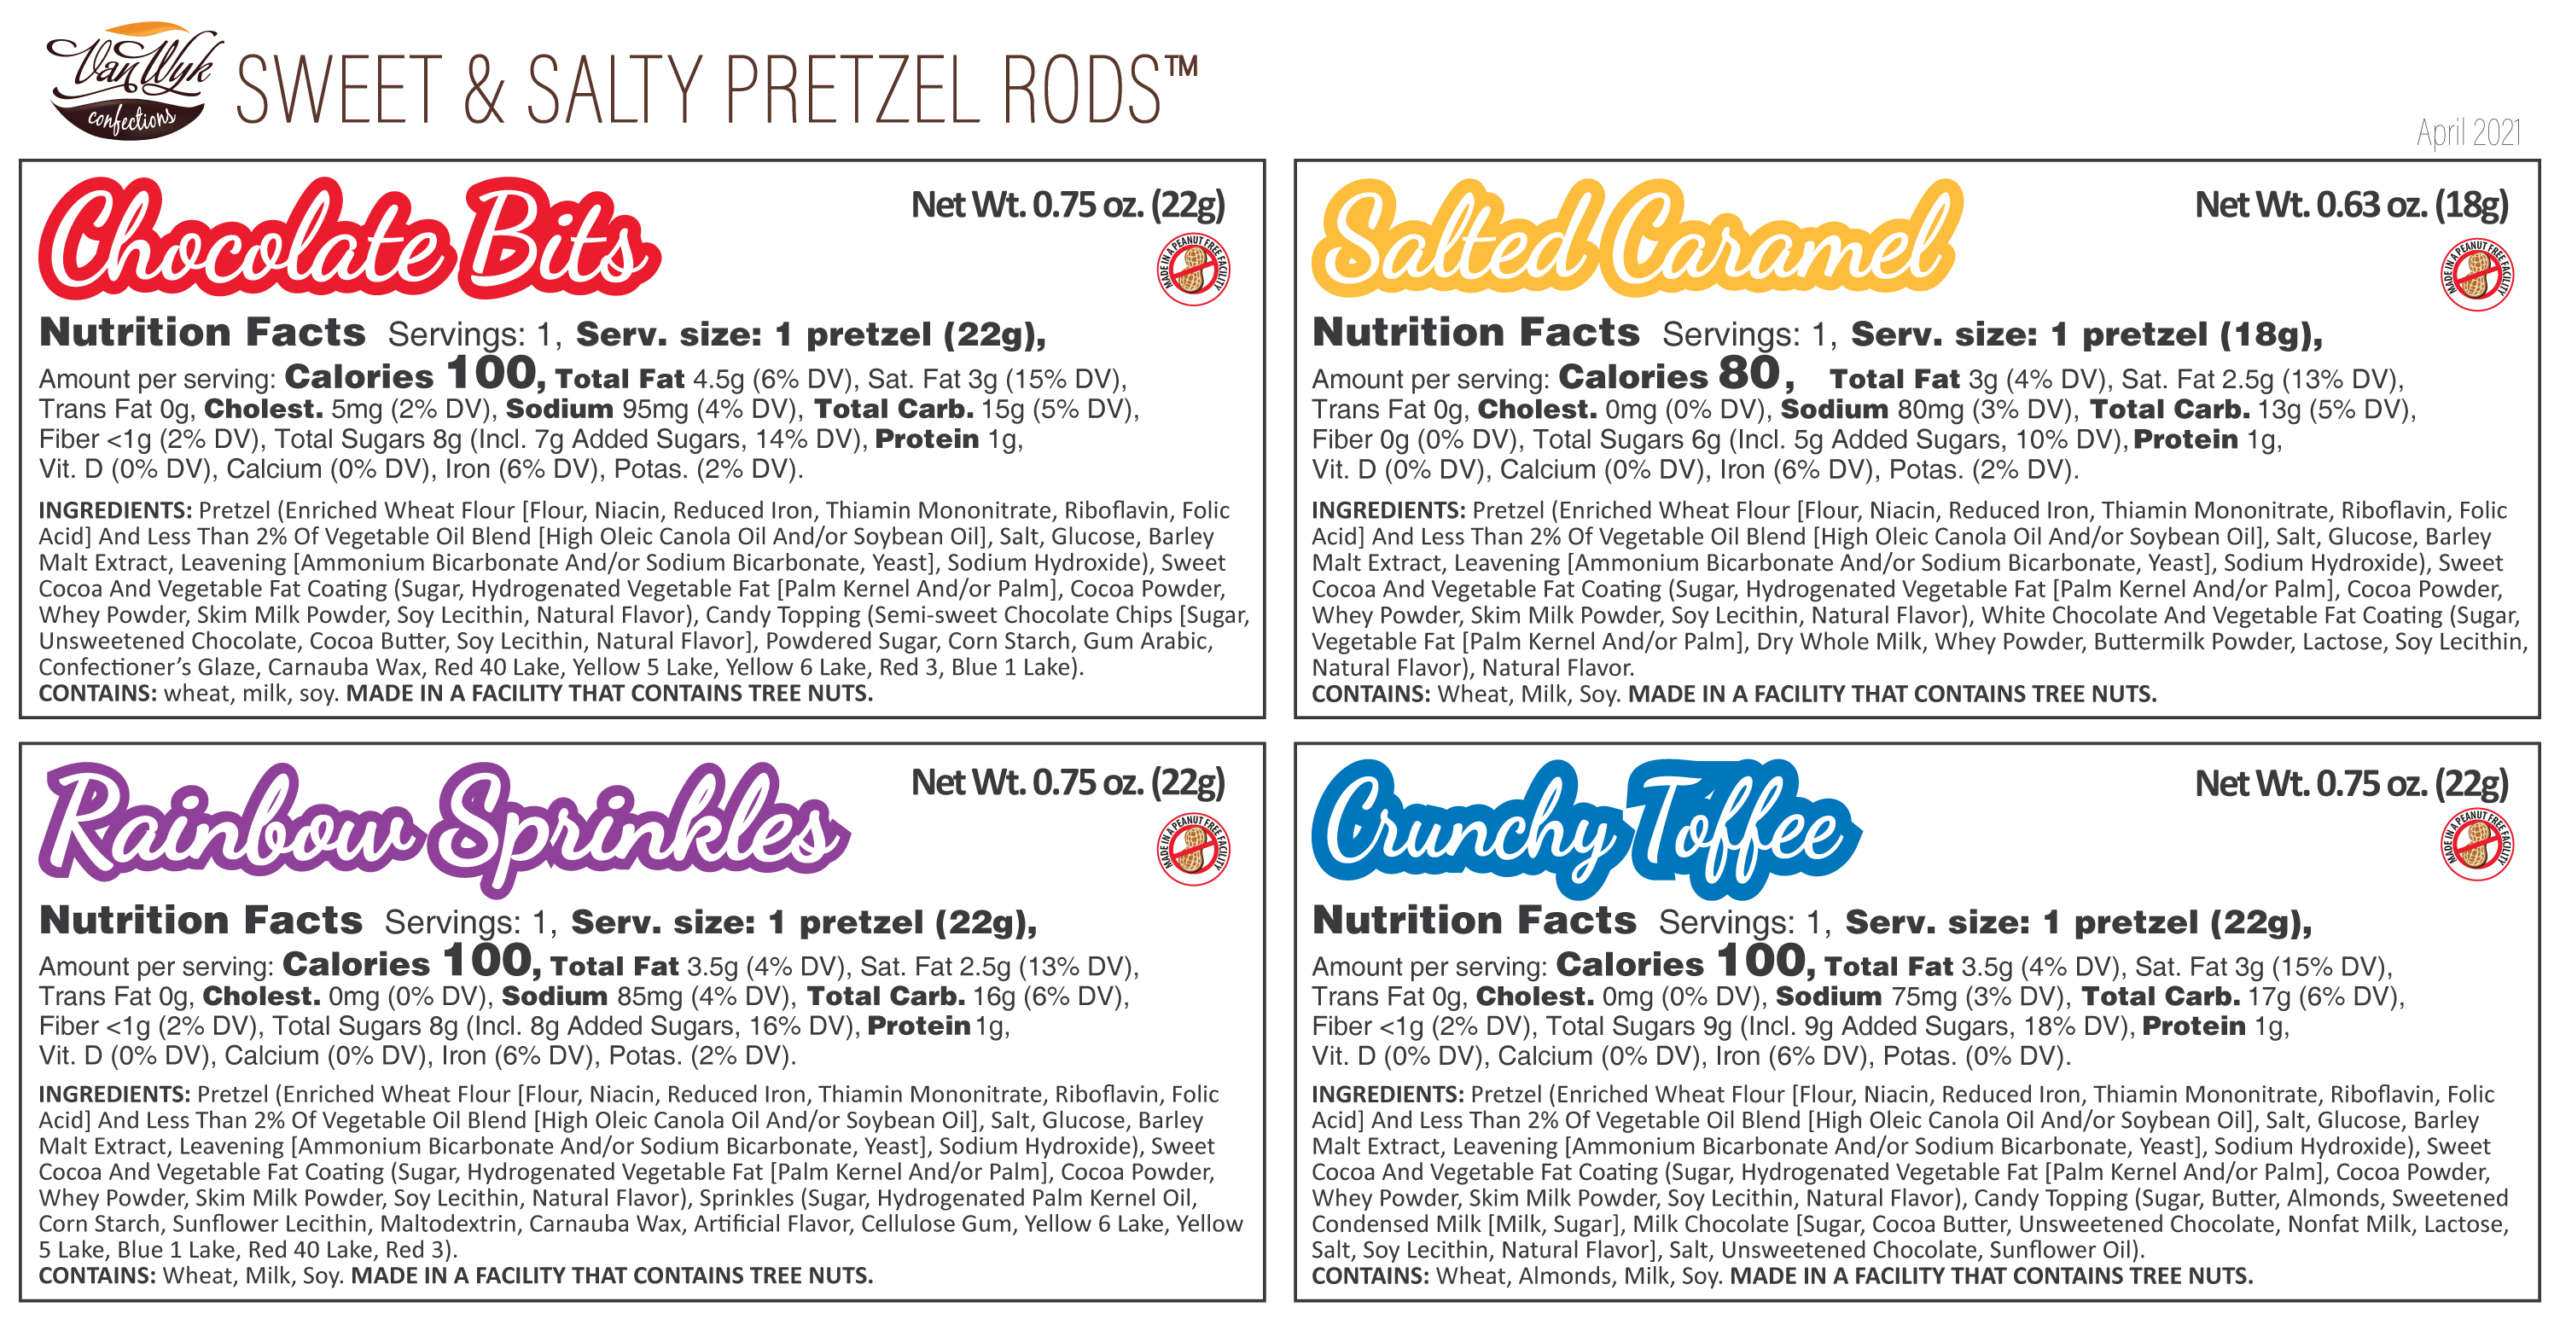 Sweet & Salty Pretzel Rods Nutrition Facts and Ingredients